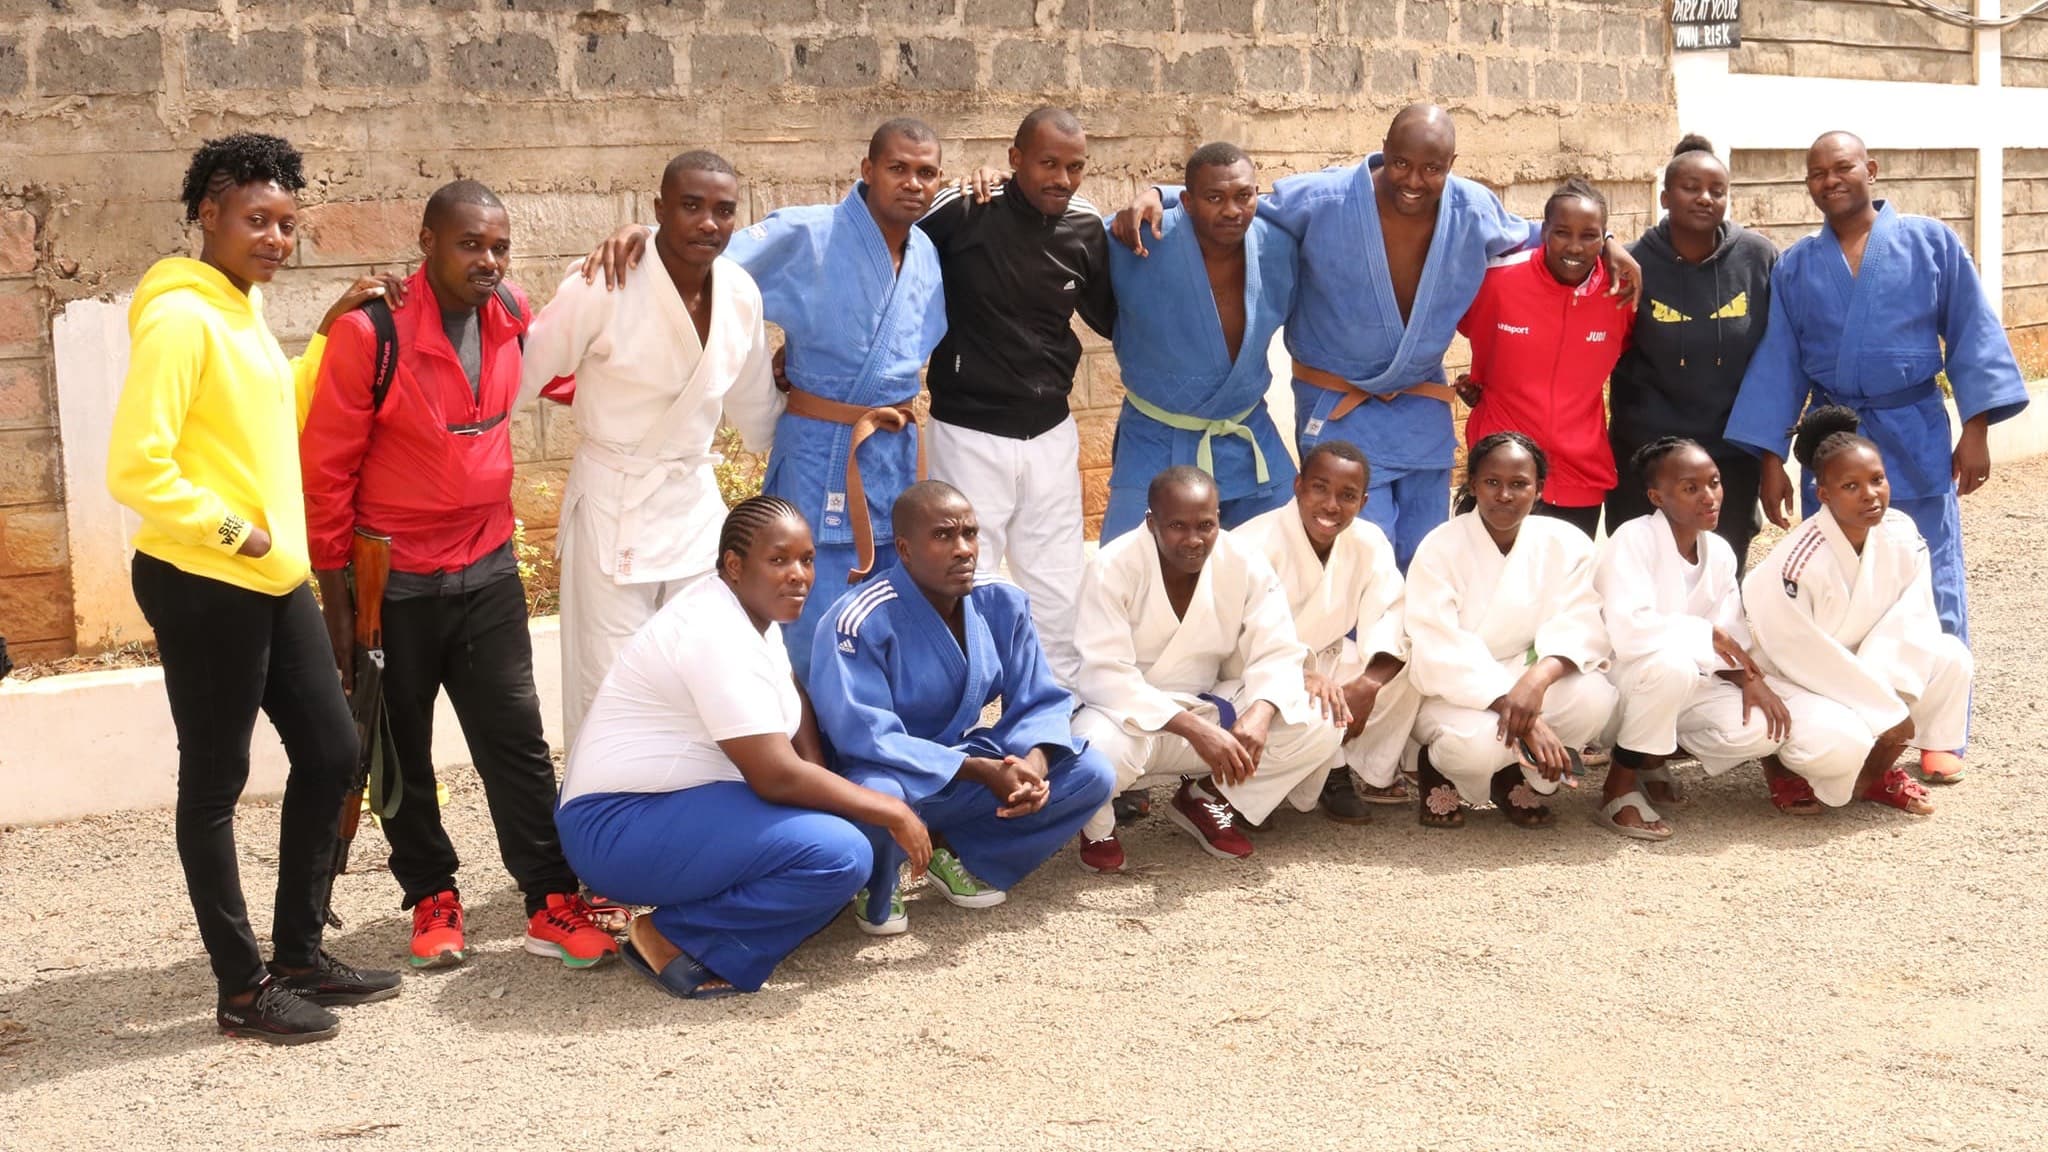 Kenyan judokas gear up for African Championships with eyes on Olympic qualification